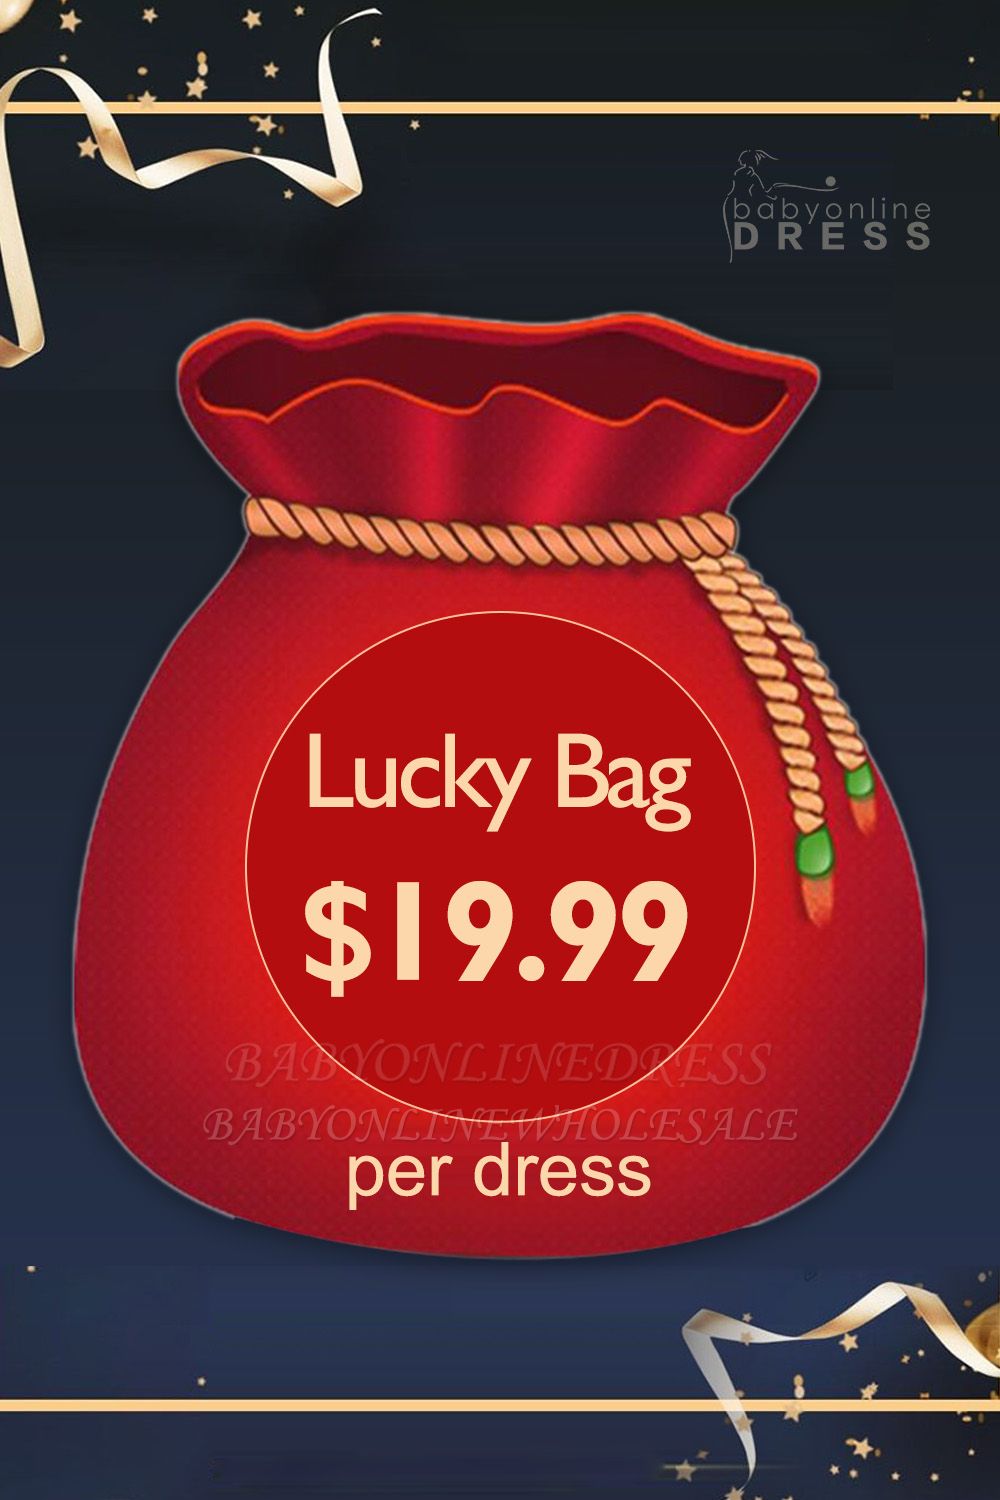 $19.99 to get Lucky Bag with a Random Hot Sale Dress